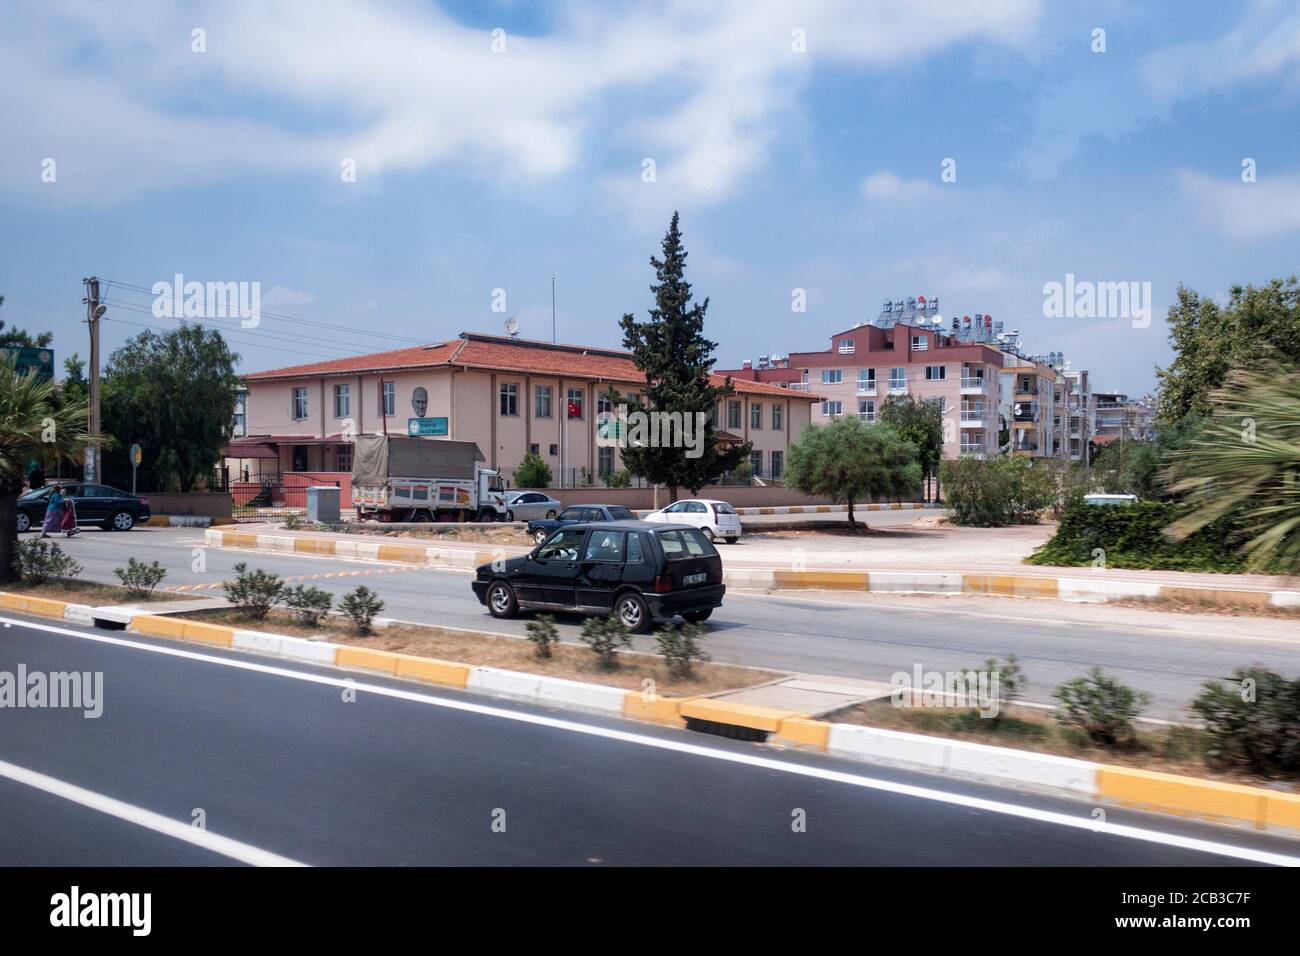 ANTALYA, TURKEY - JULY 10, 2015: On the streets of Antalya. Local flavor and good roads attract tourists Stock Photo